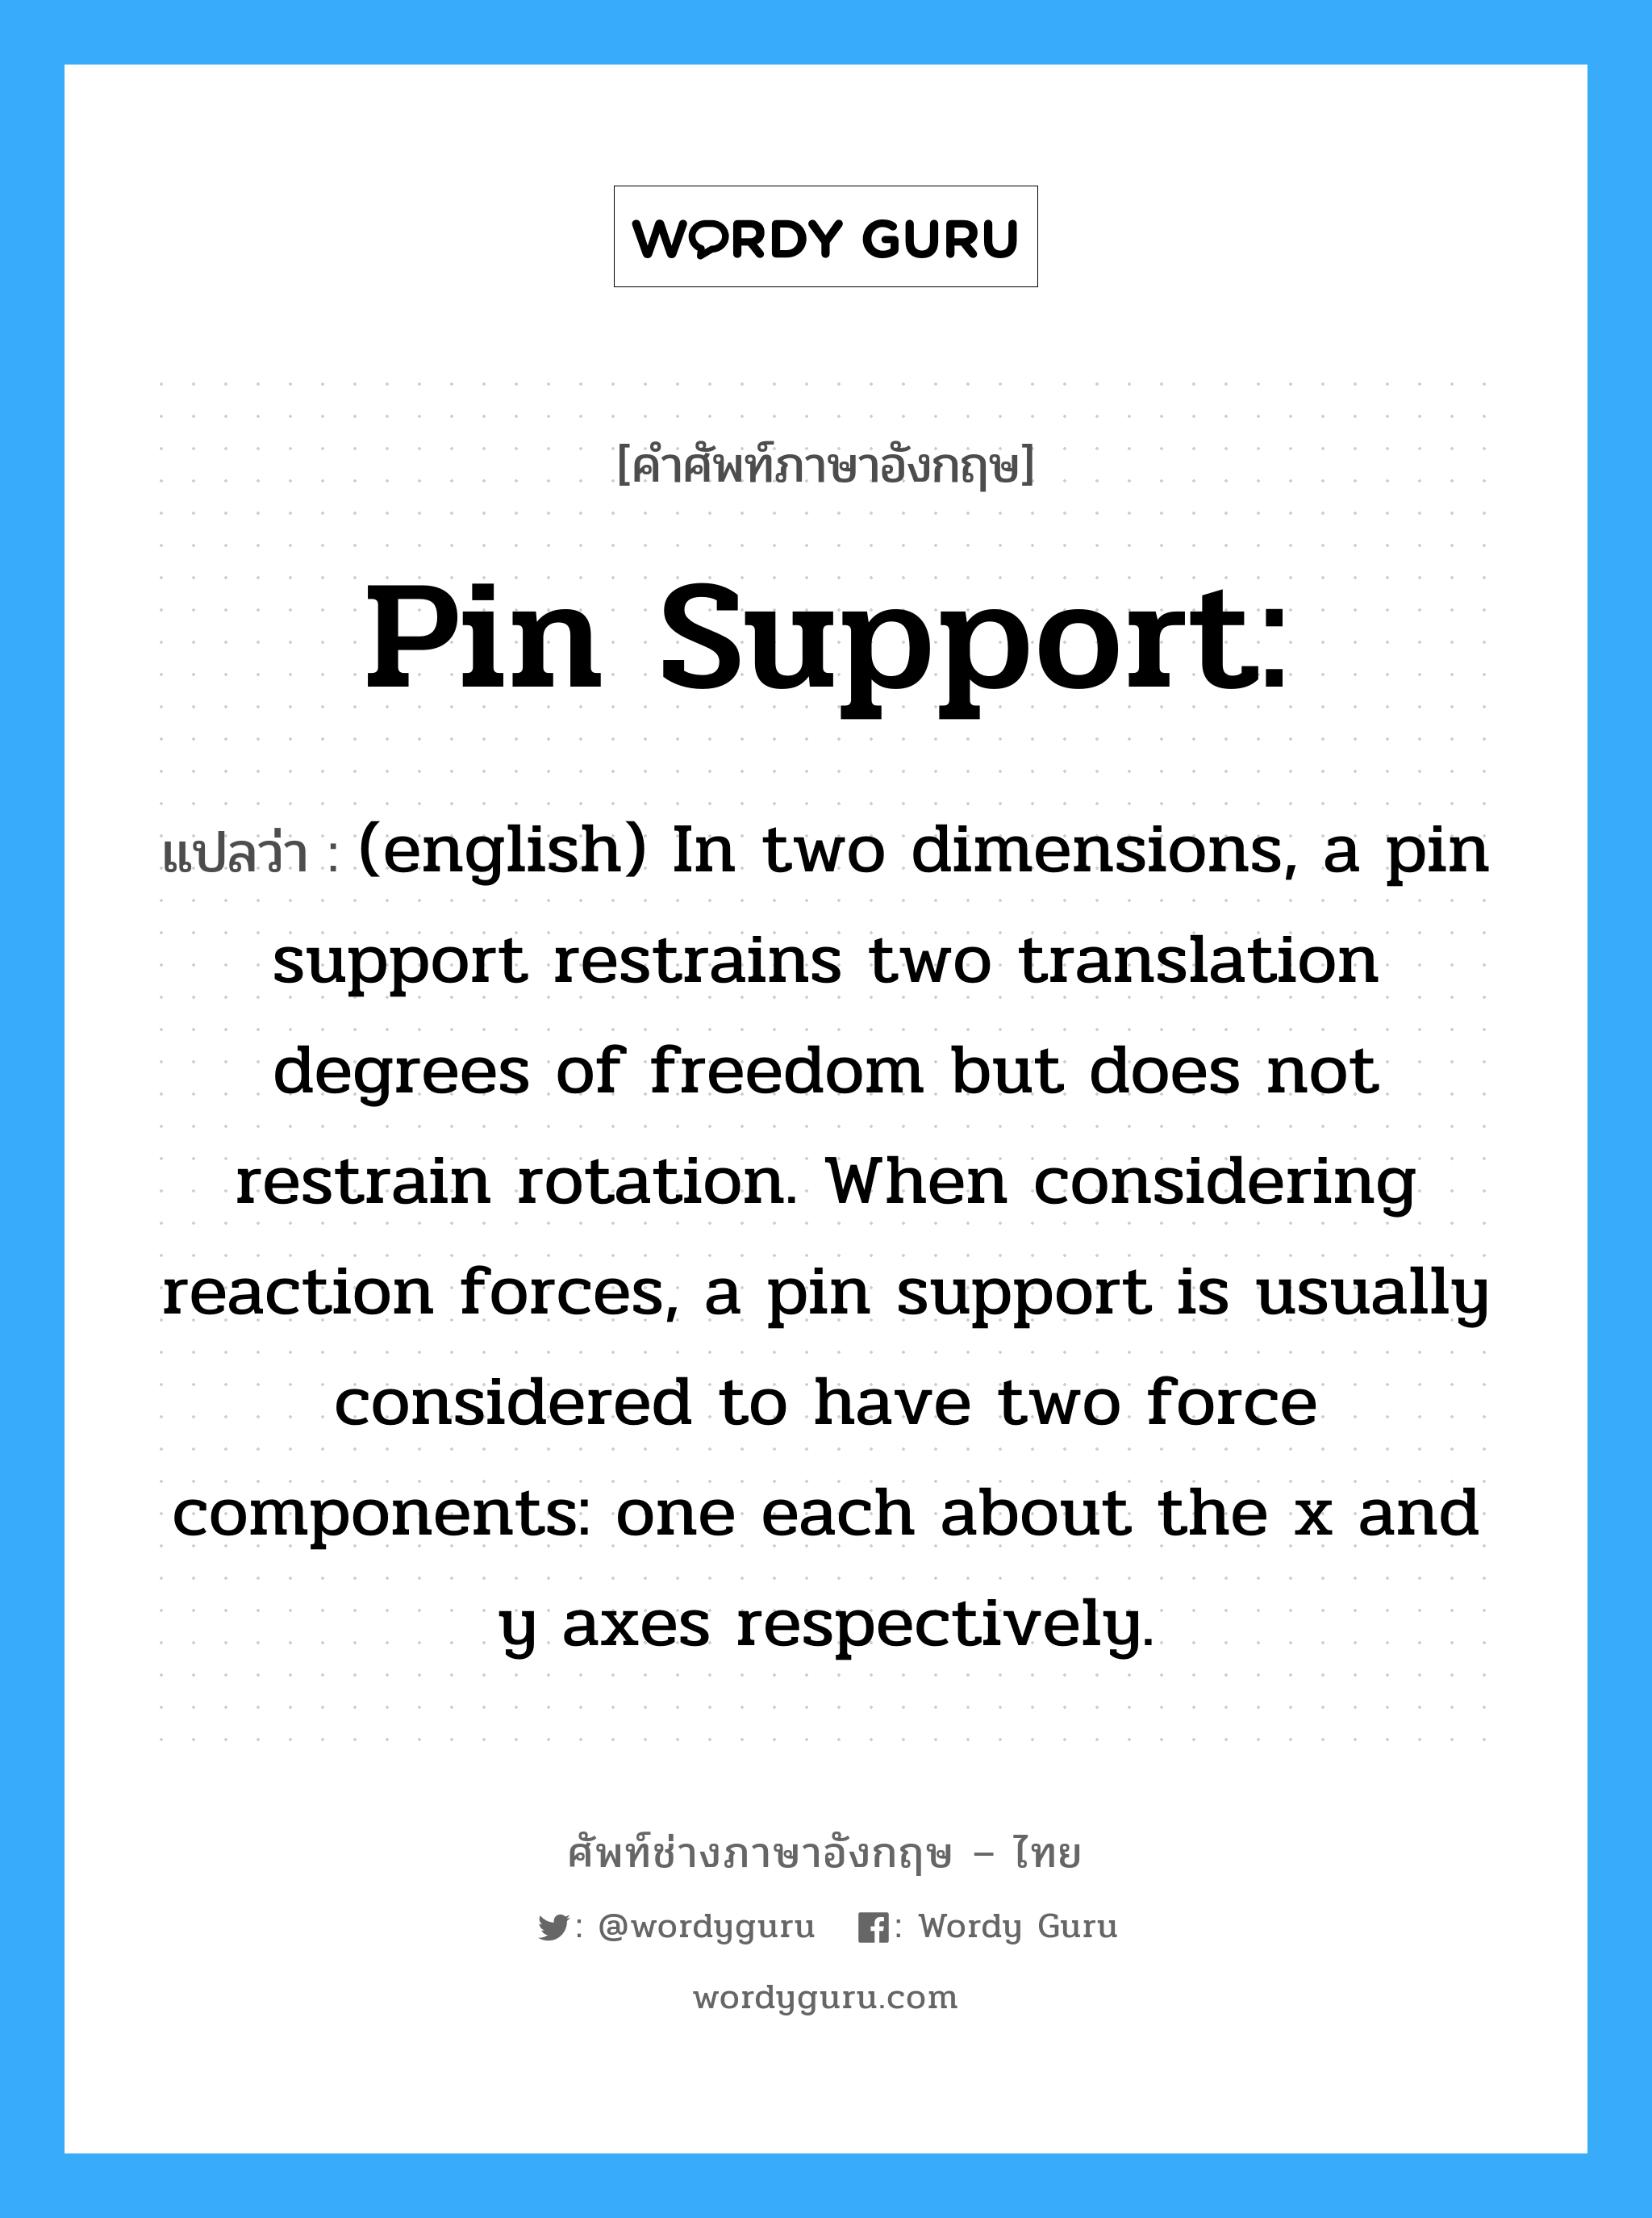 Pin support: แปลว่า?, คำศัพท์ช่างภาษาอังกฤษ - ไทย Pin support: คำศัพท์ภาษาอังกฤษ Pin support: แปลว่า (english) In two dimensions, a pin support restrains two translation degrees of freedom but does not restrain rotation. When considering reaction forces, a pin support is usually considered to have two force components: one each about the x and y axes respectively.